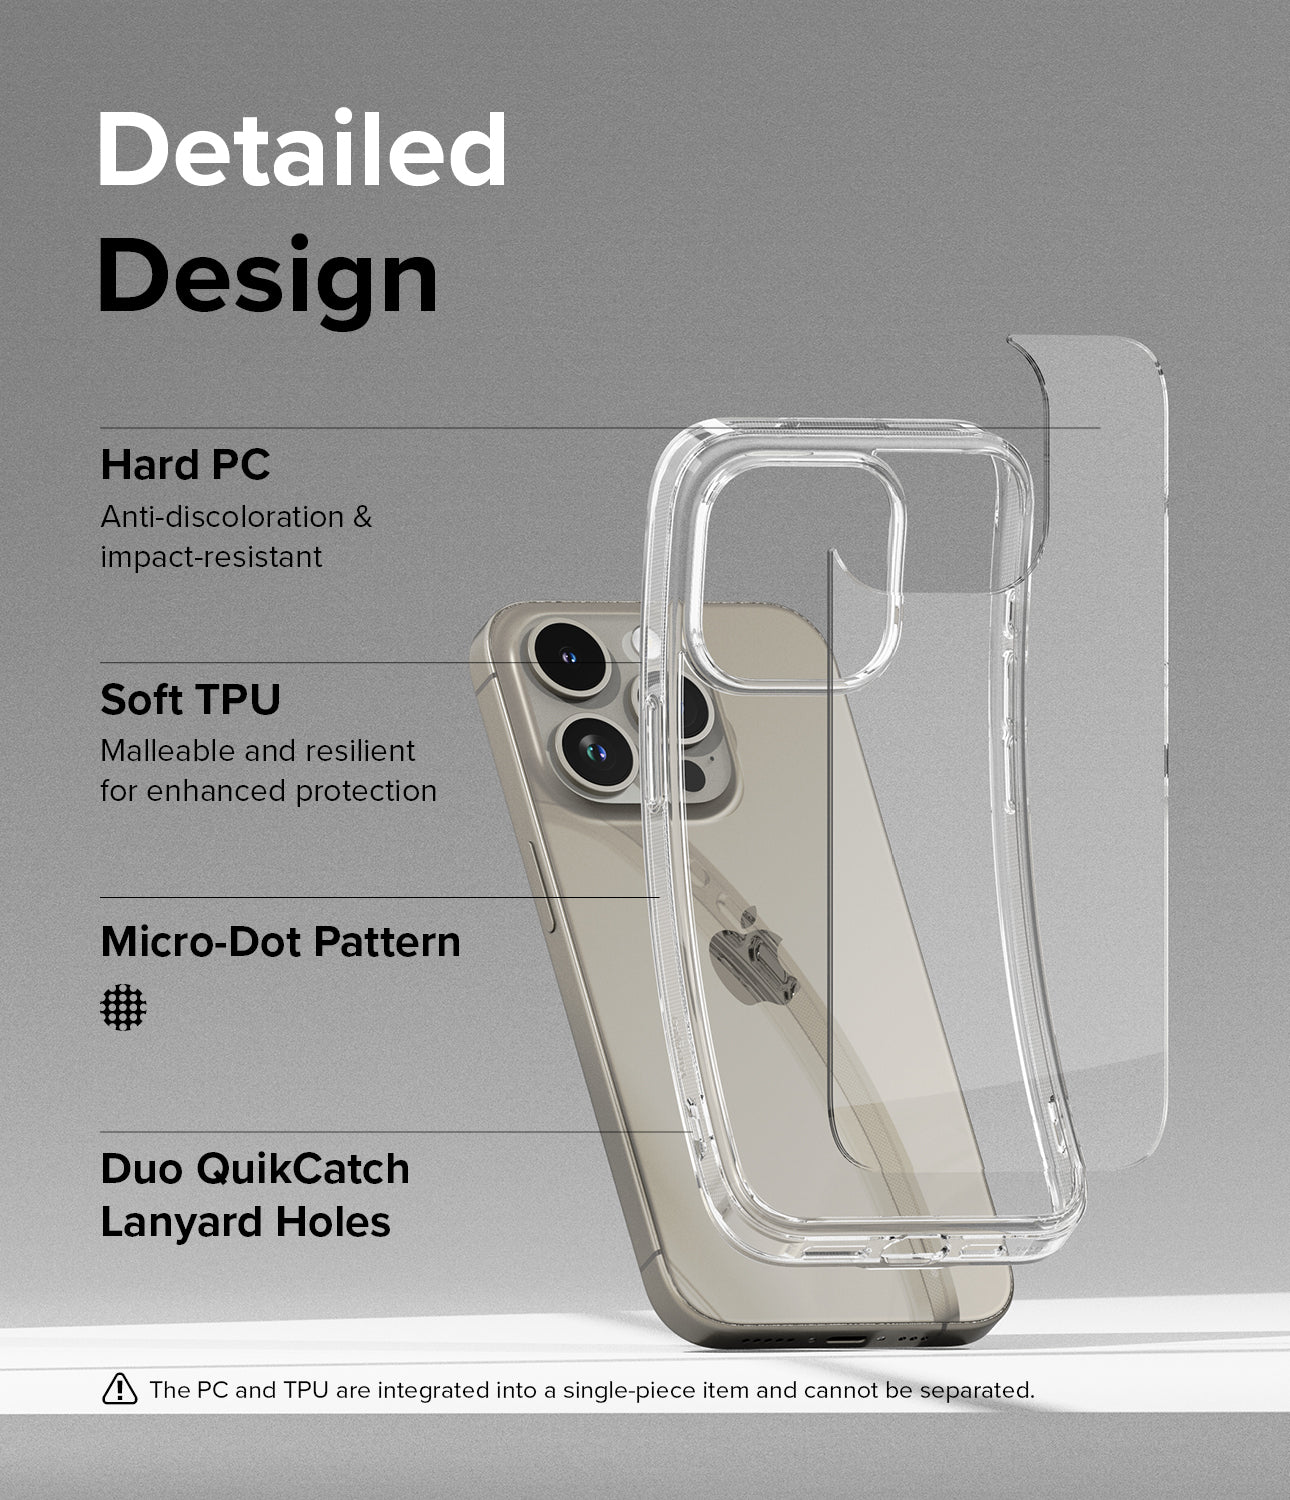 iPhone 15 Pro Case | Fusion - Detailed Design. Anti-discoloration and impact-resistant with Hard PC. Malleable and resilient for enhanced protection with Soft TPU. Micro-Dot Pattern. Duo QuikCatch Lanyard Holes.